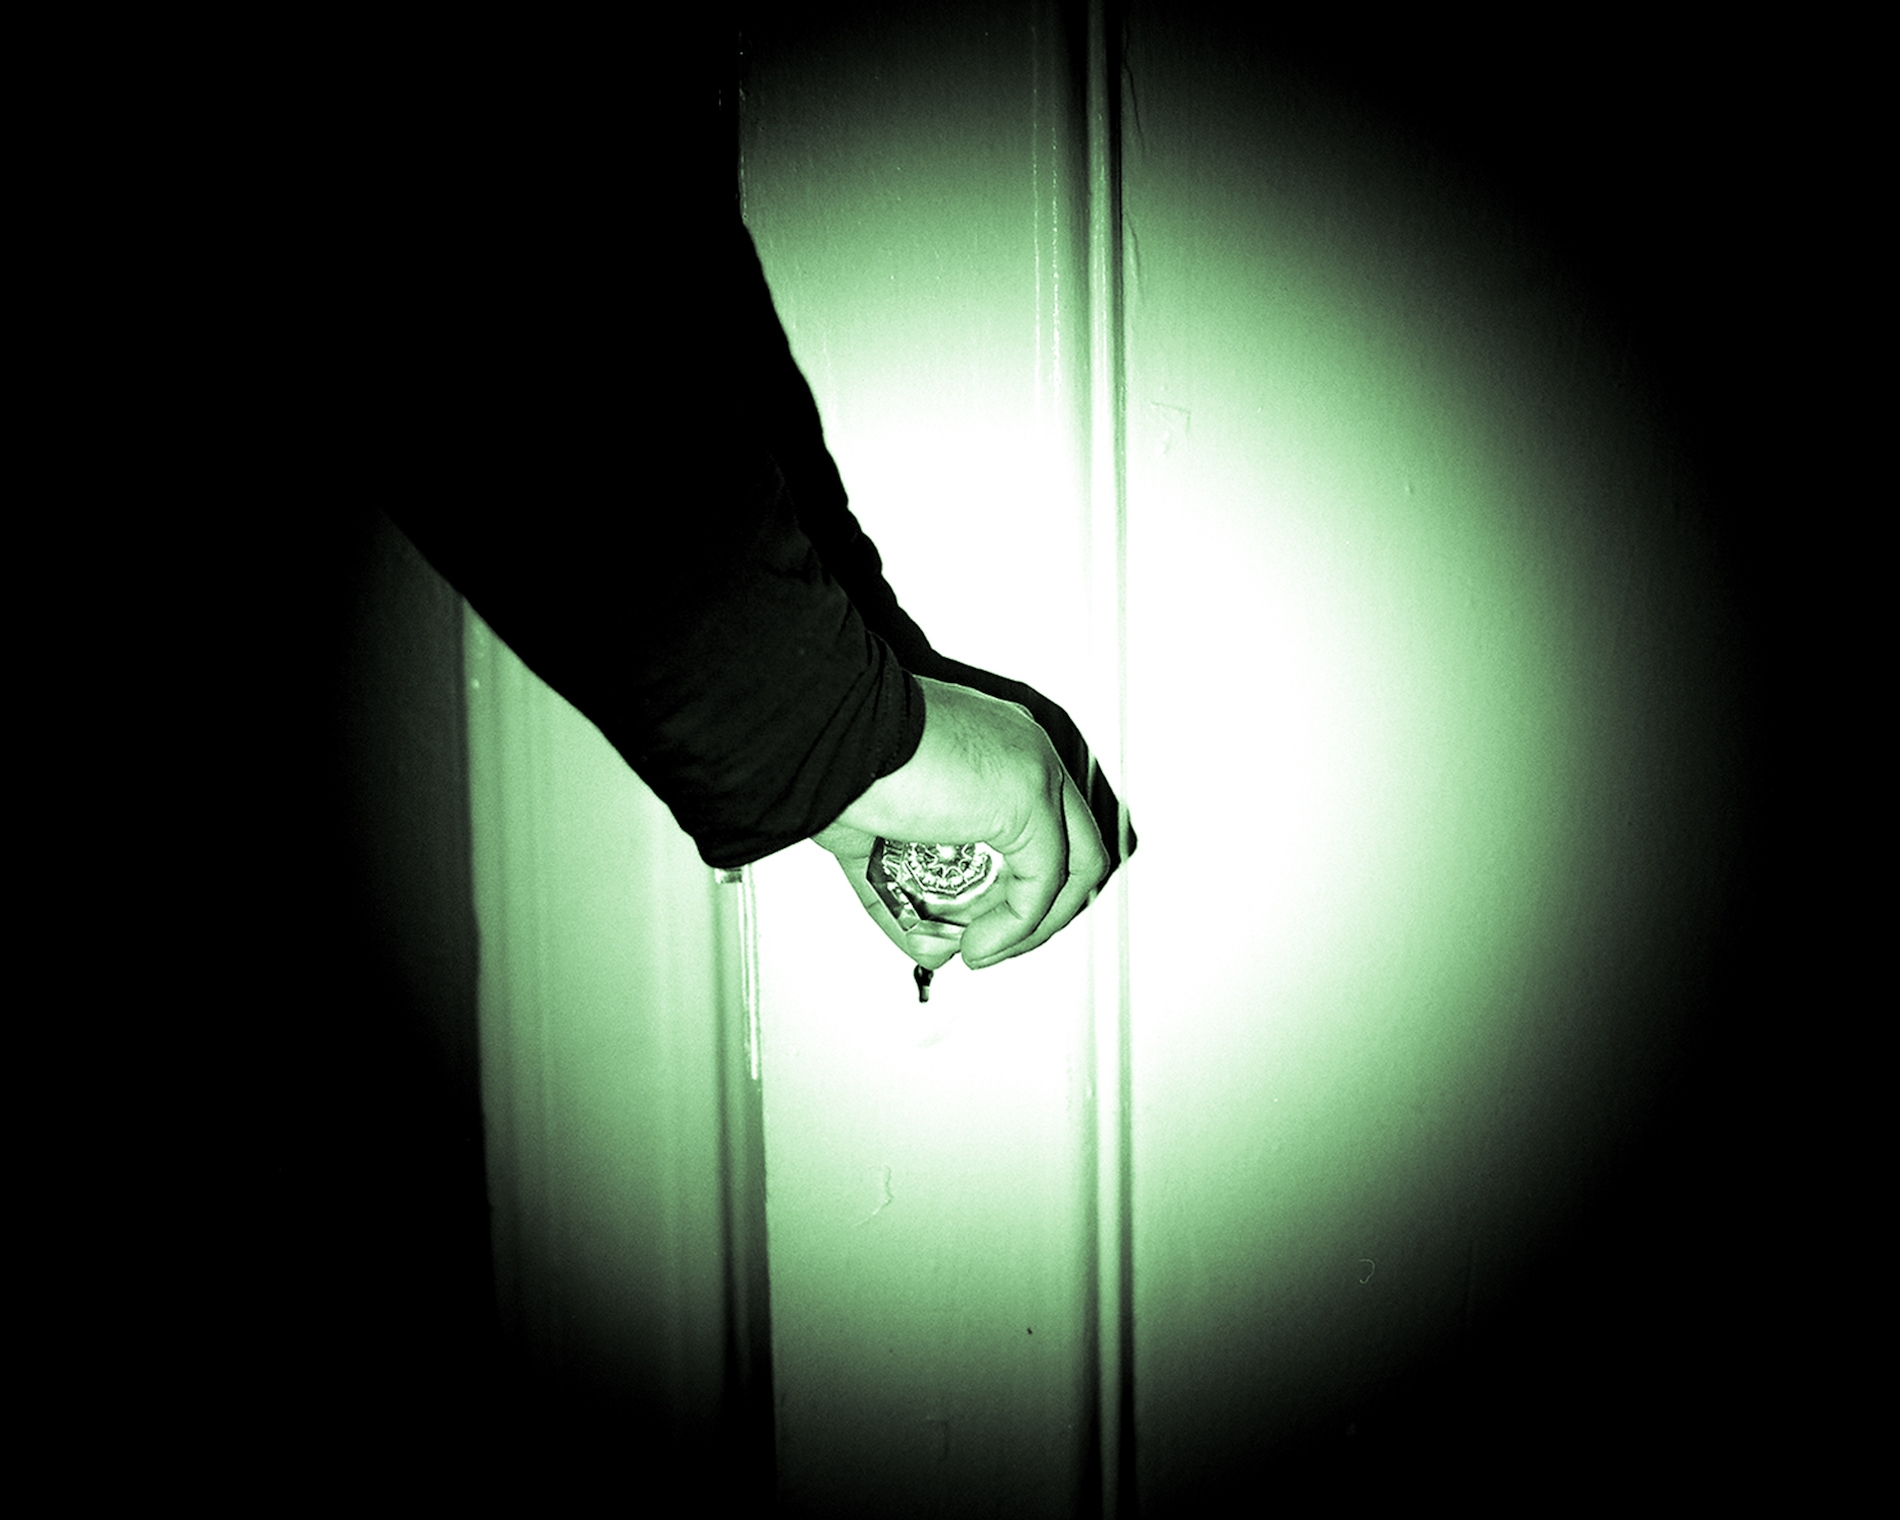 A spotlight shines on a close up of a hand gripping a door handle